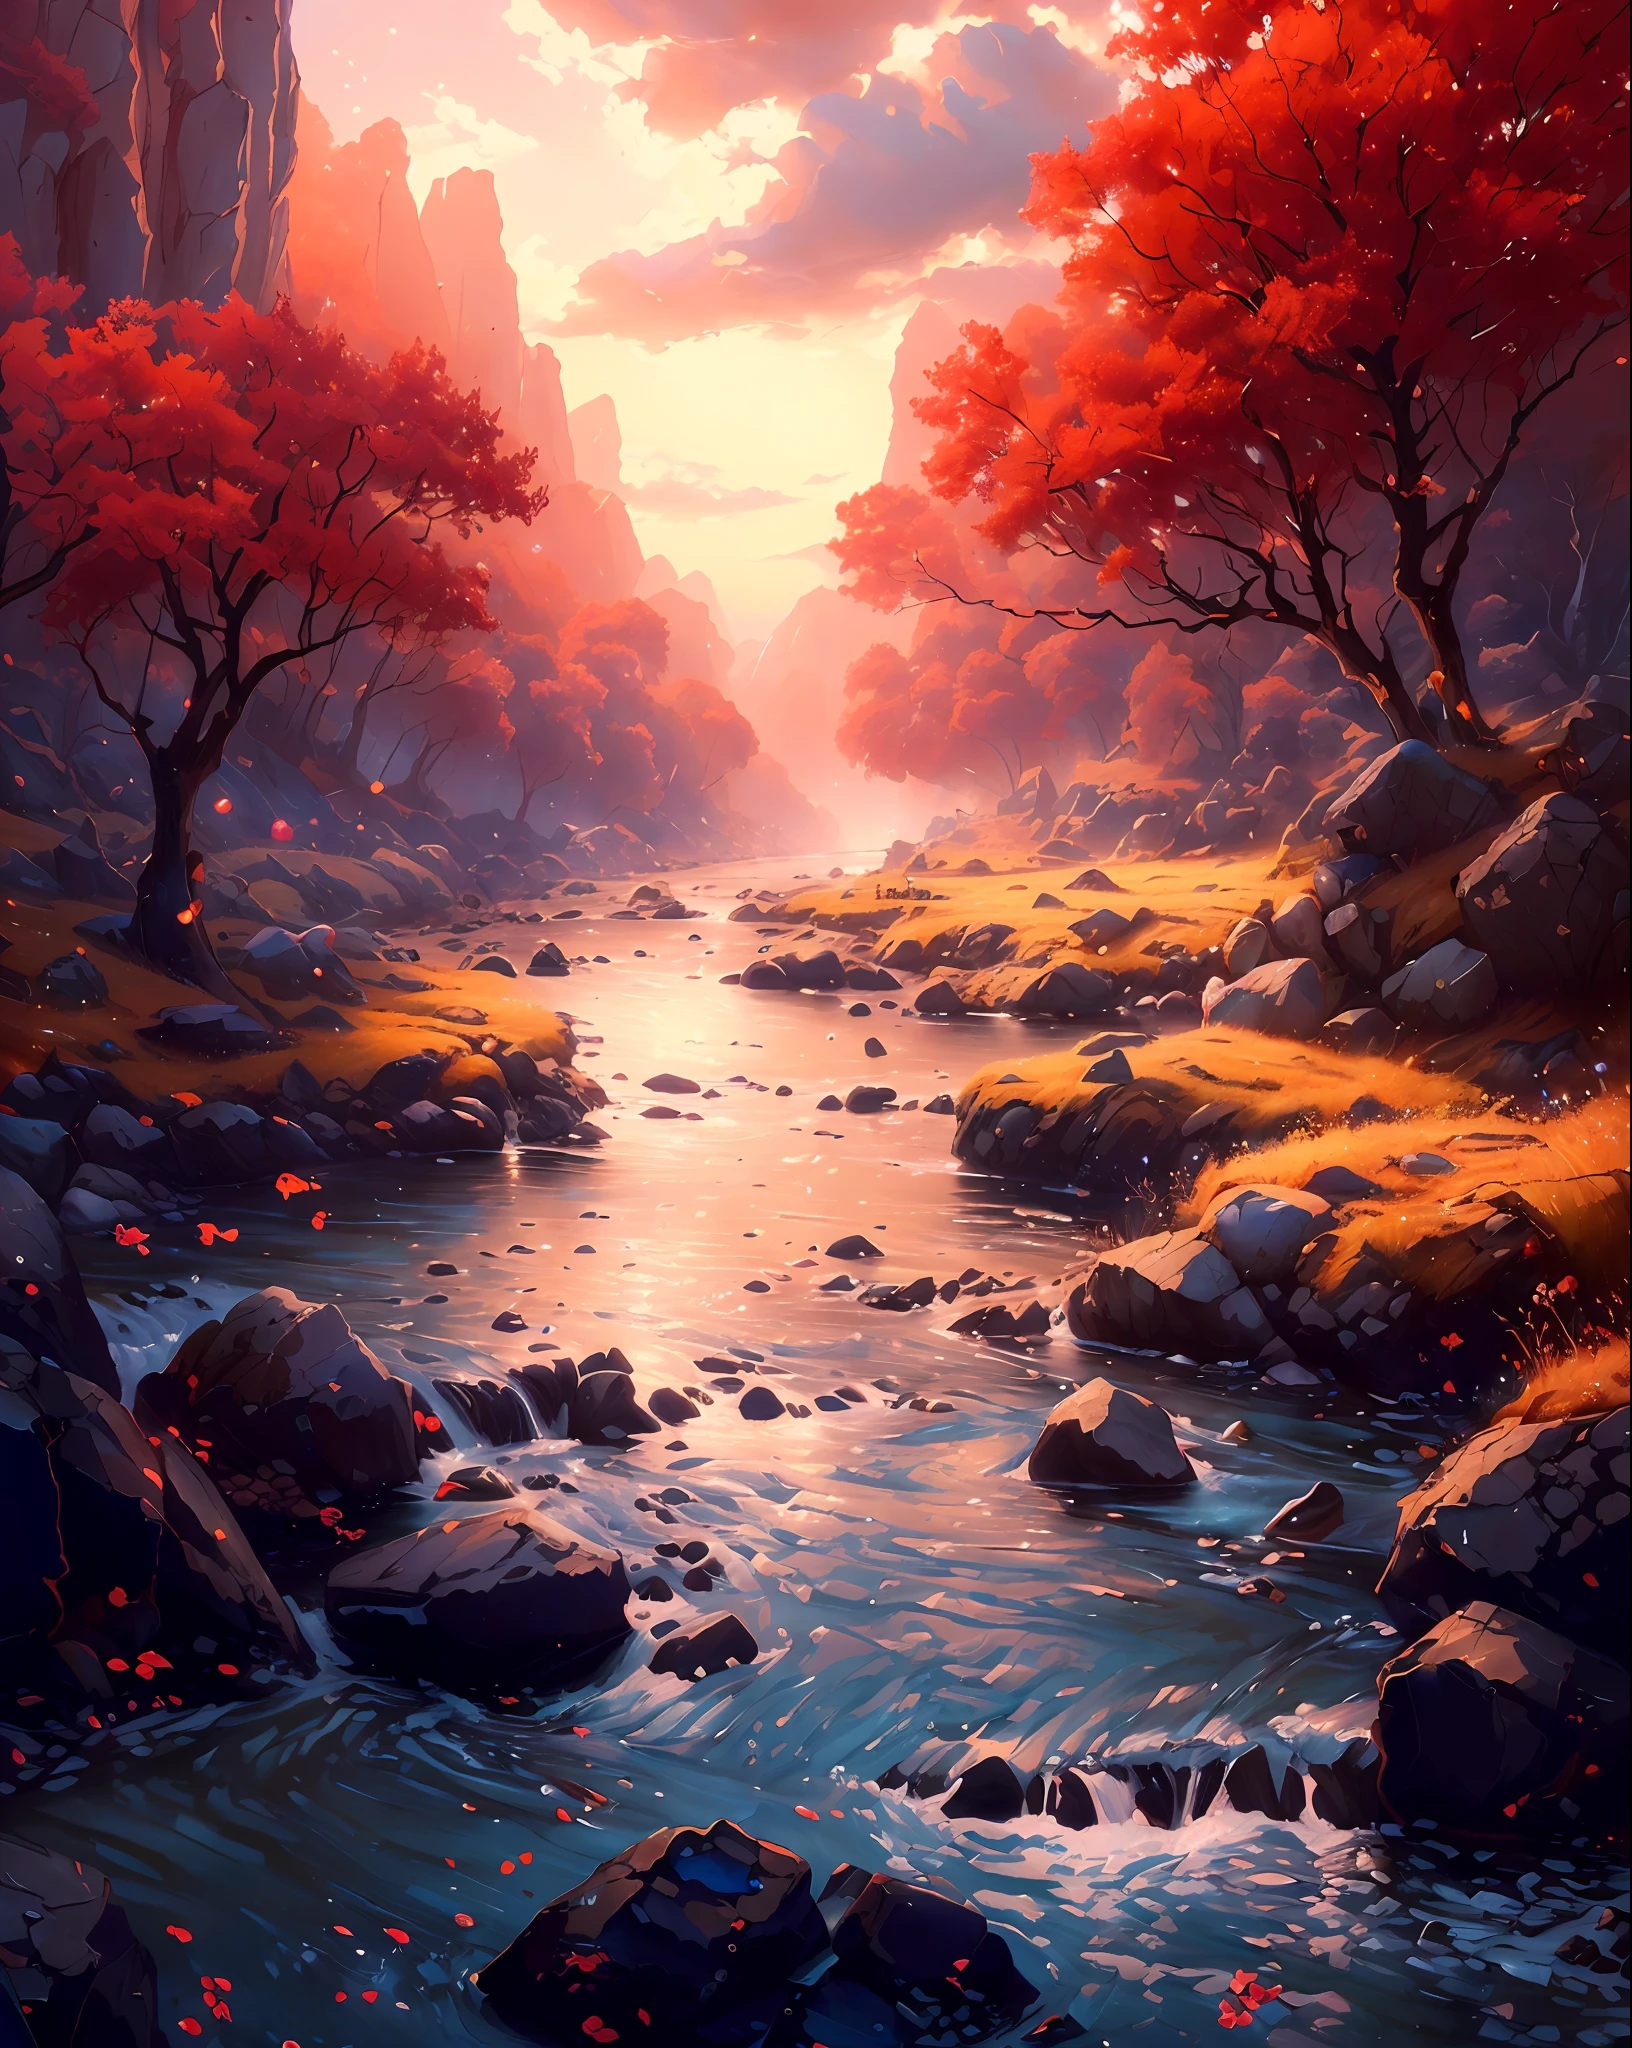 a painting of a river with rocks and trees in the background, by sylvain sarrailh, 8k high quality detailed art, inspired by sylvain sarrailh, detailed painting 4 k, beautiful art uhd 4 k, silvain sarrailh, 4k highly detailed digital art, 8k stunning artwork, andreas rocha style, 4k detailed digital art